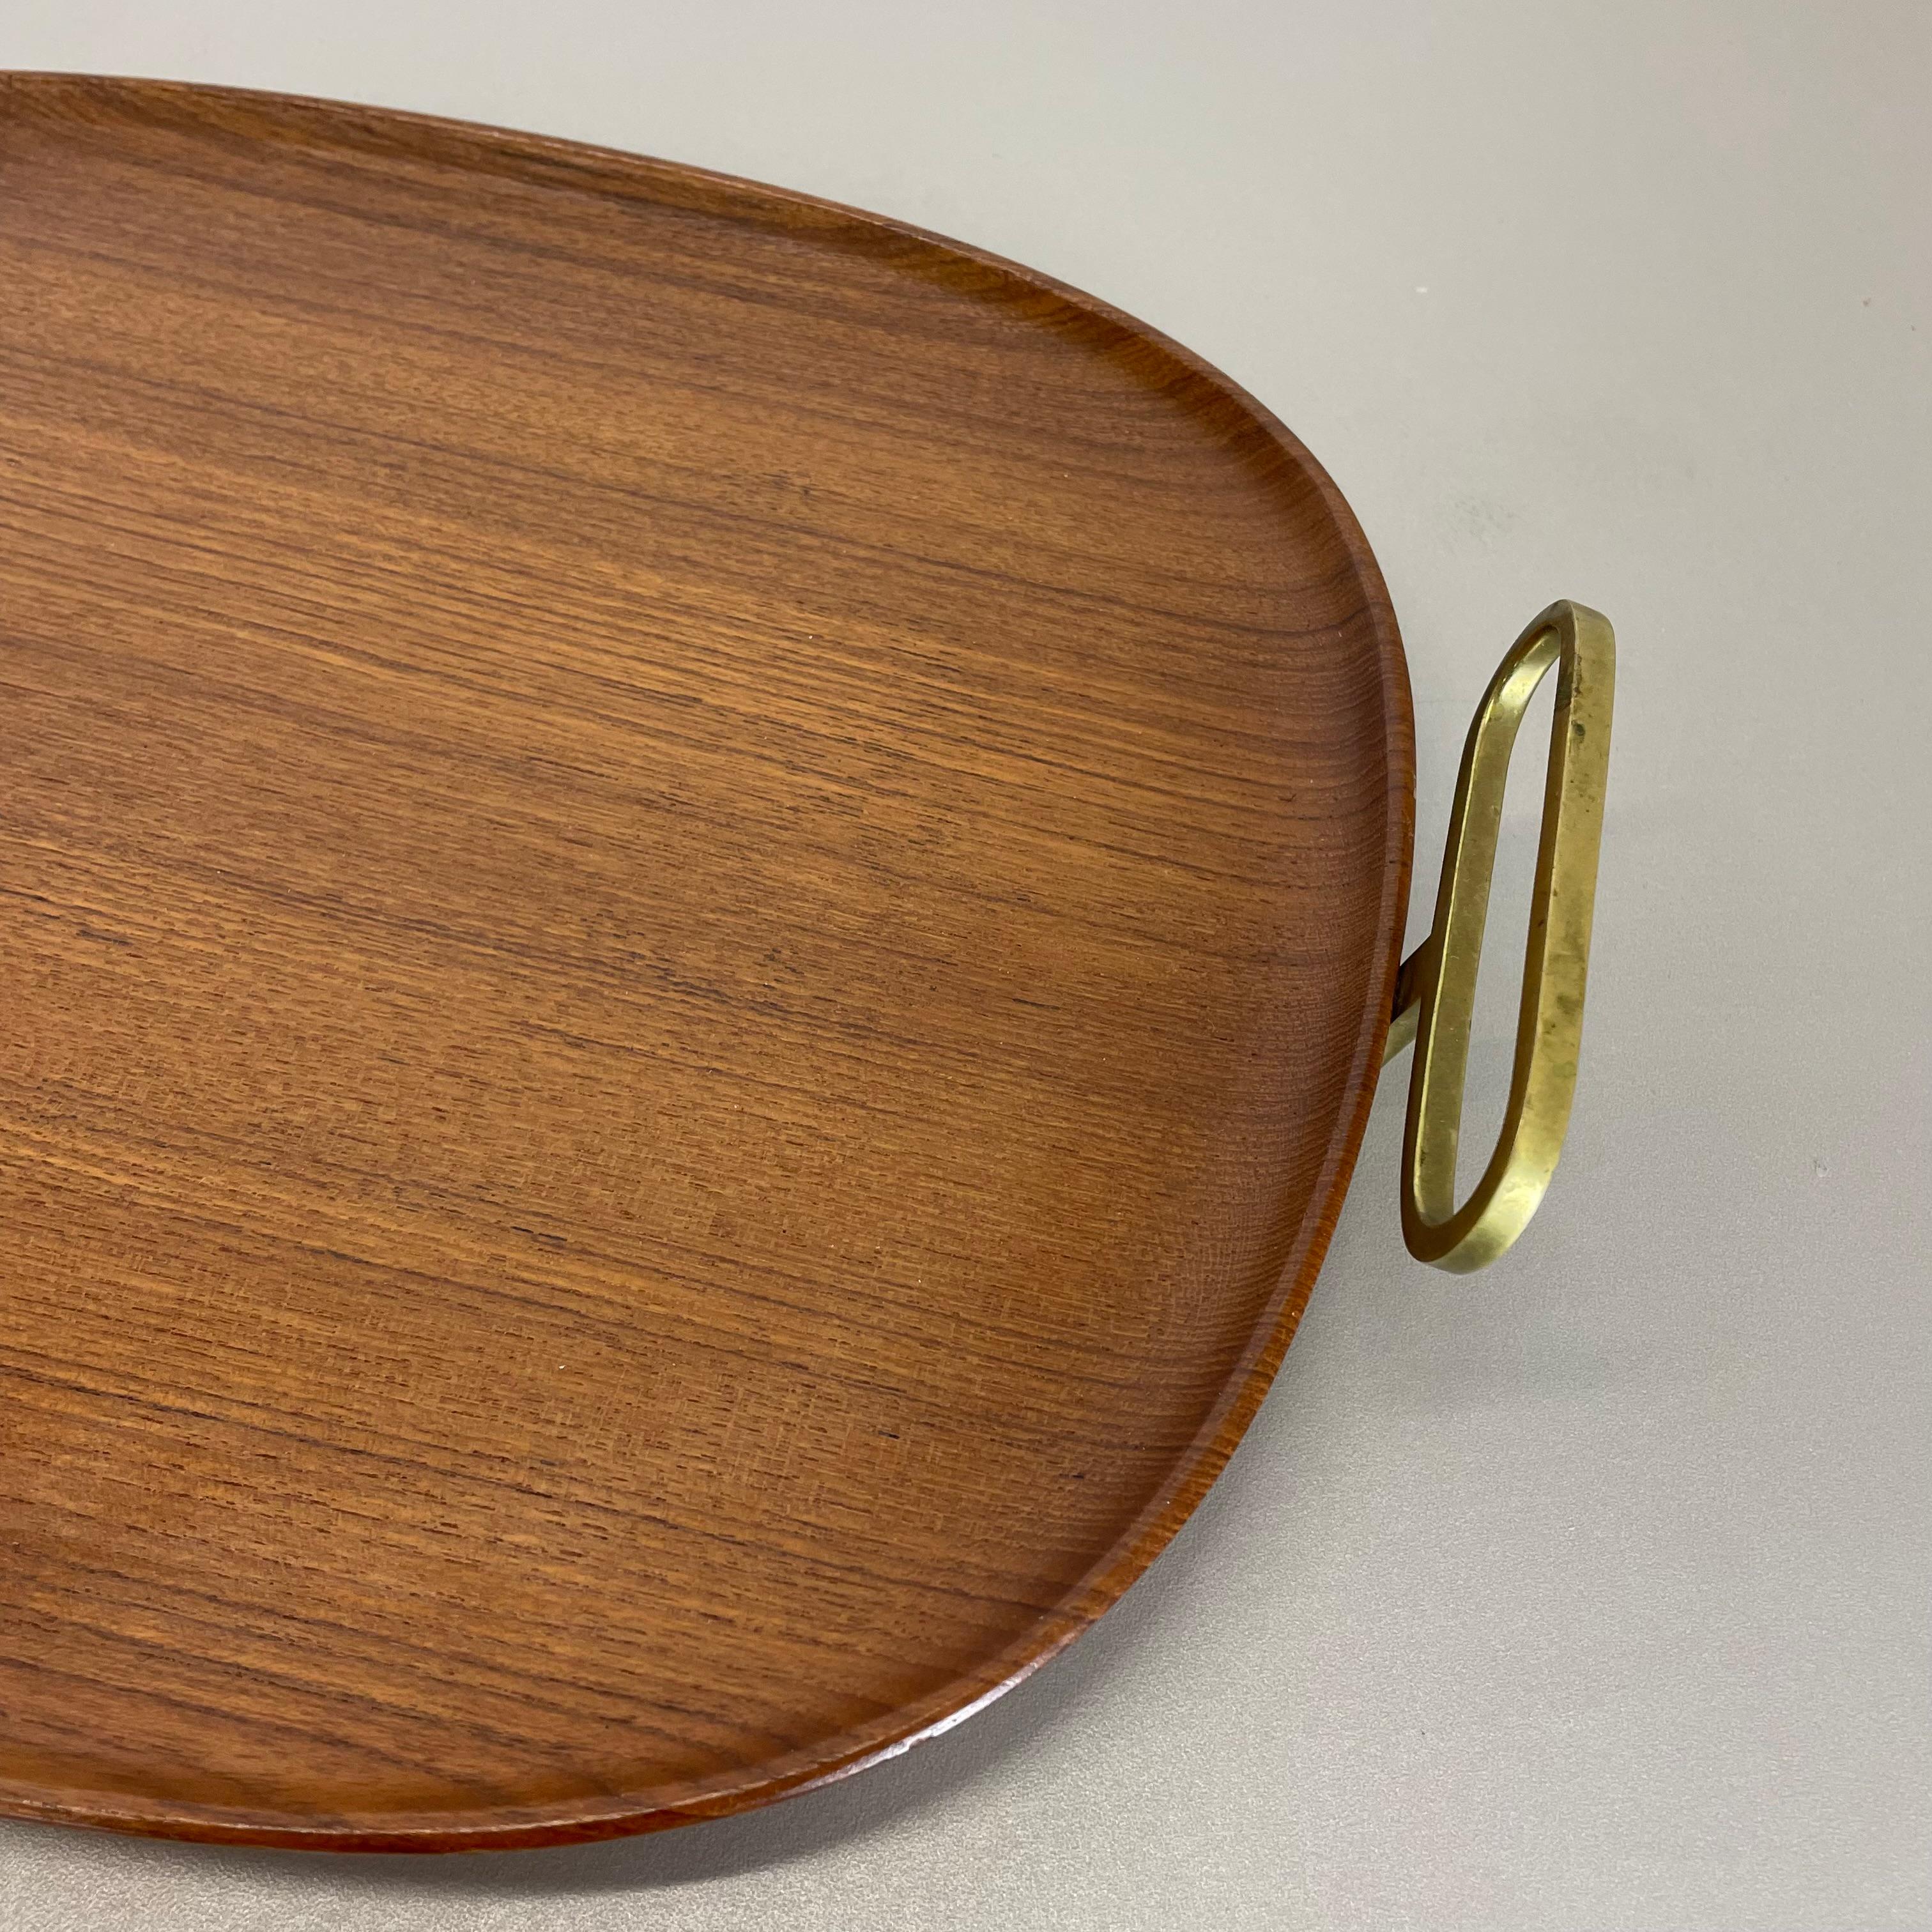 20th Century Large TEAK Tray Plate Element with Brass Handle by Carl Auböck, Austria, 1950s For Sale